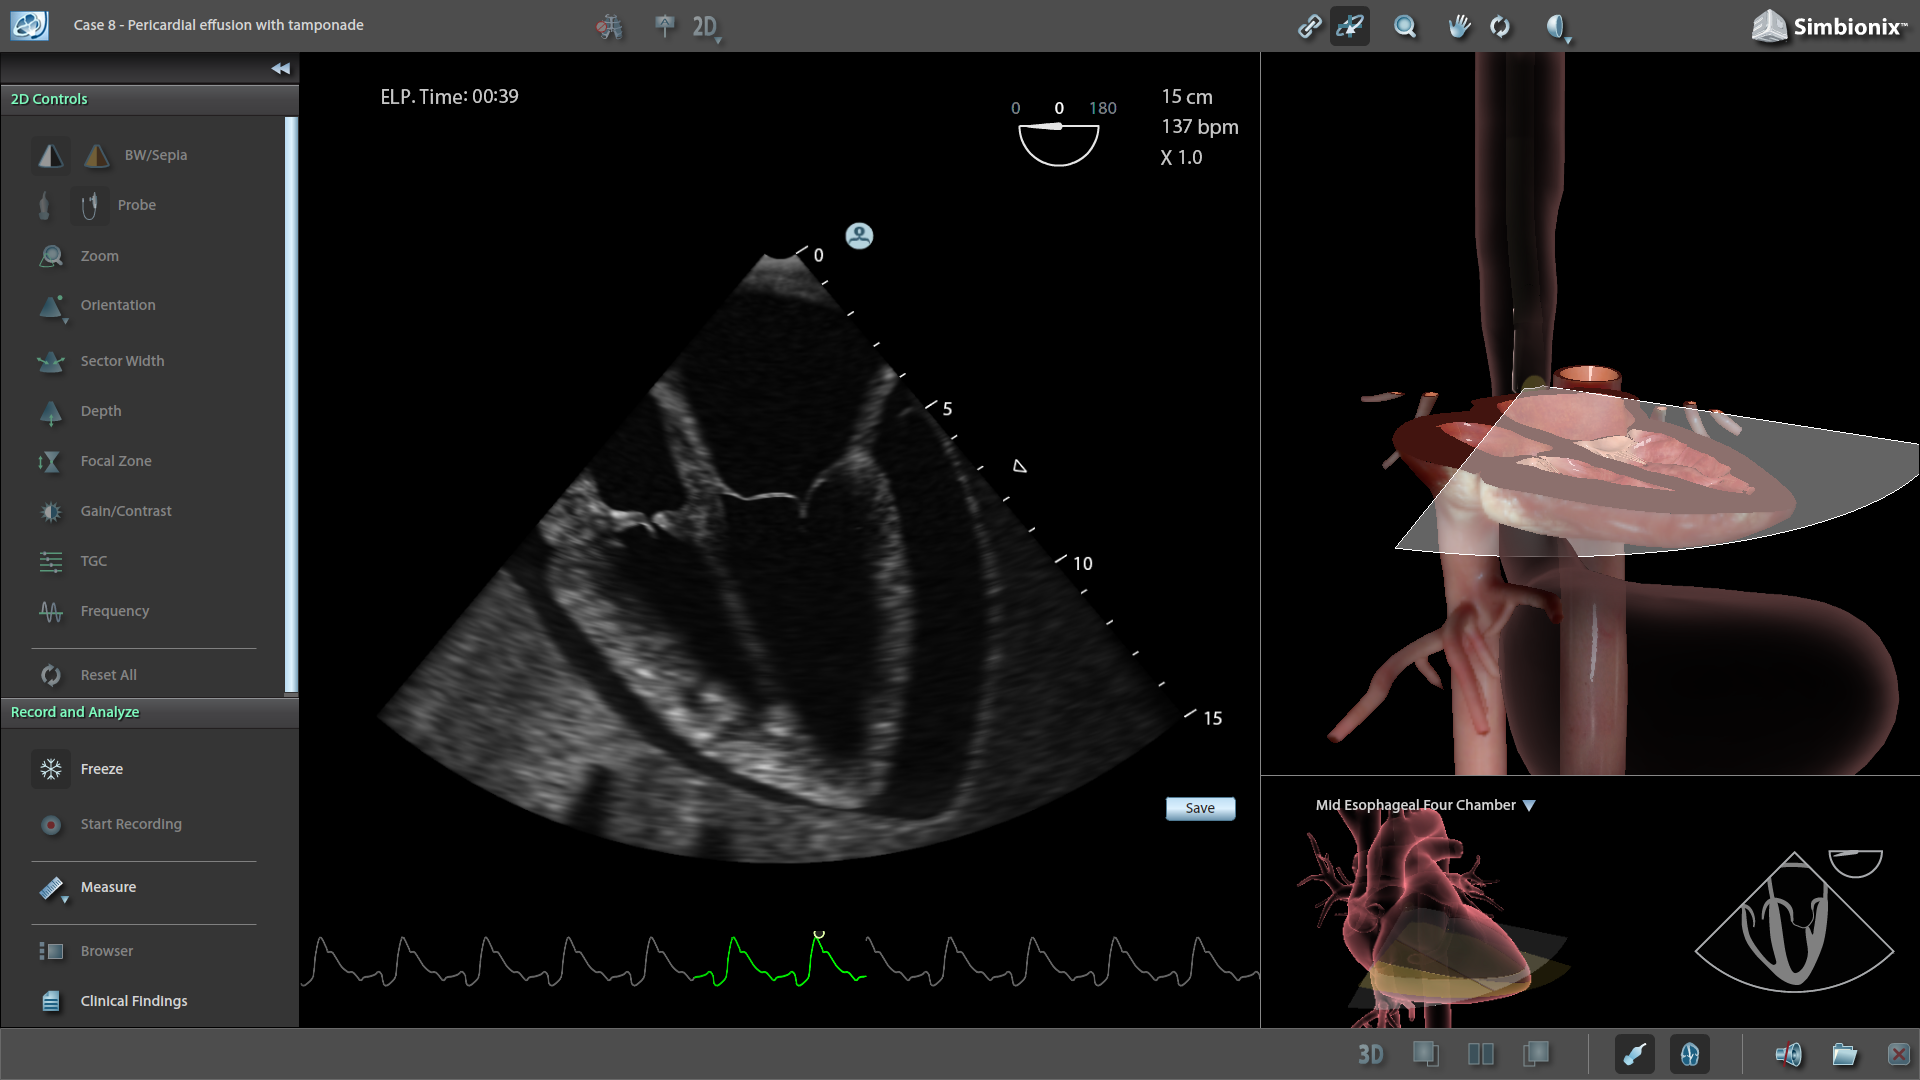 Pericardial effusion with Temponade